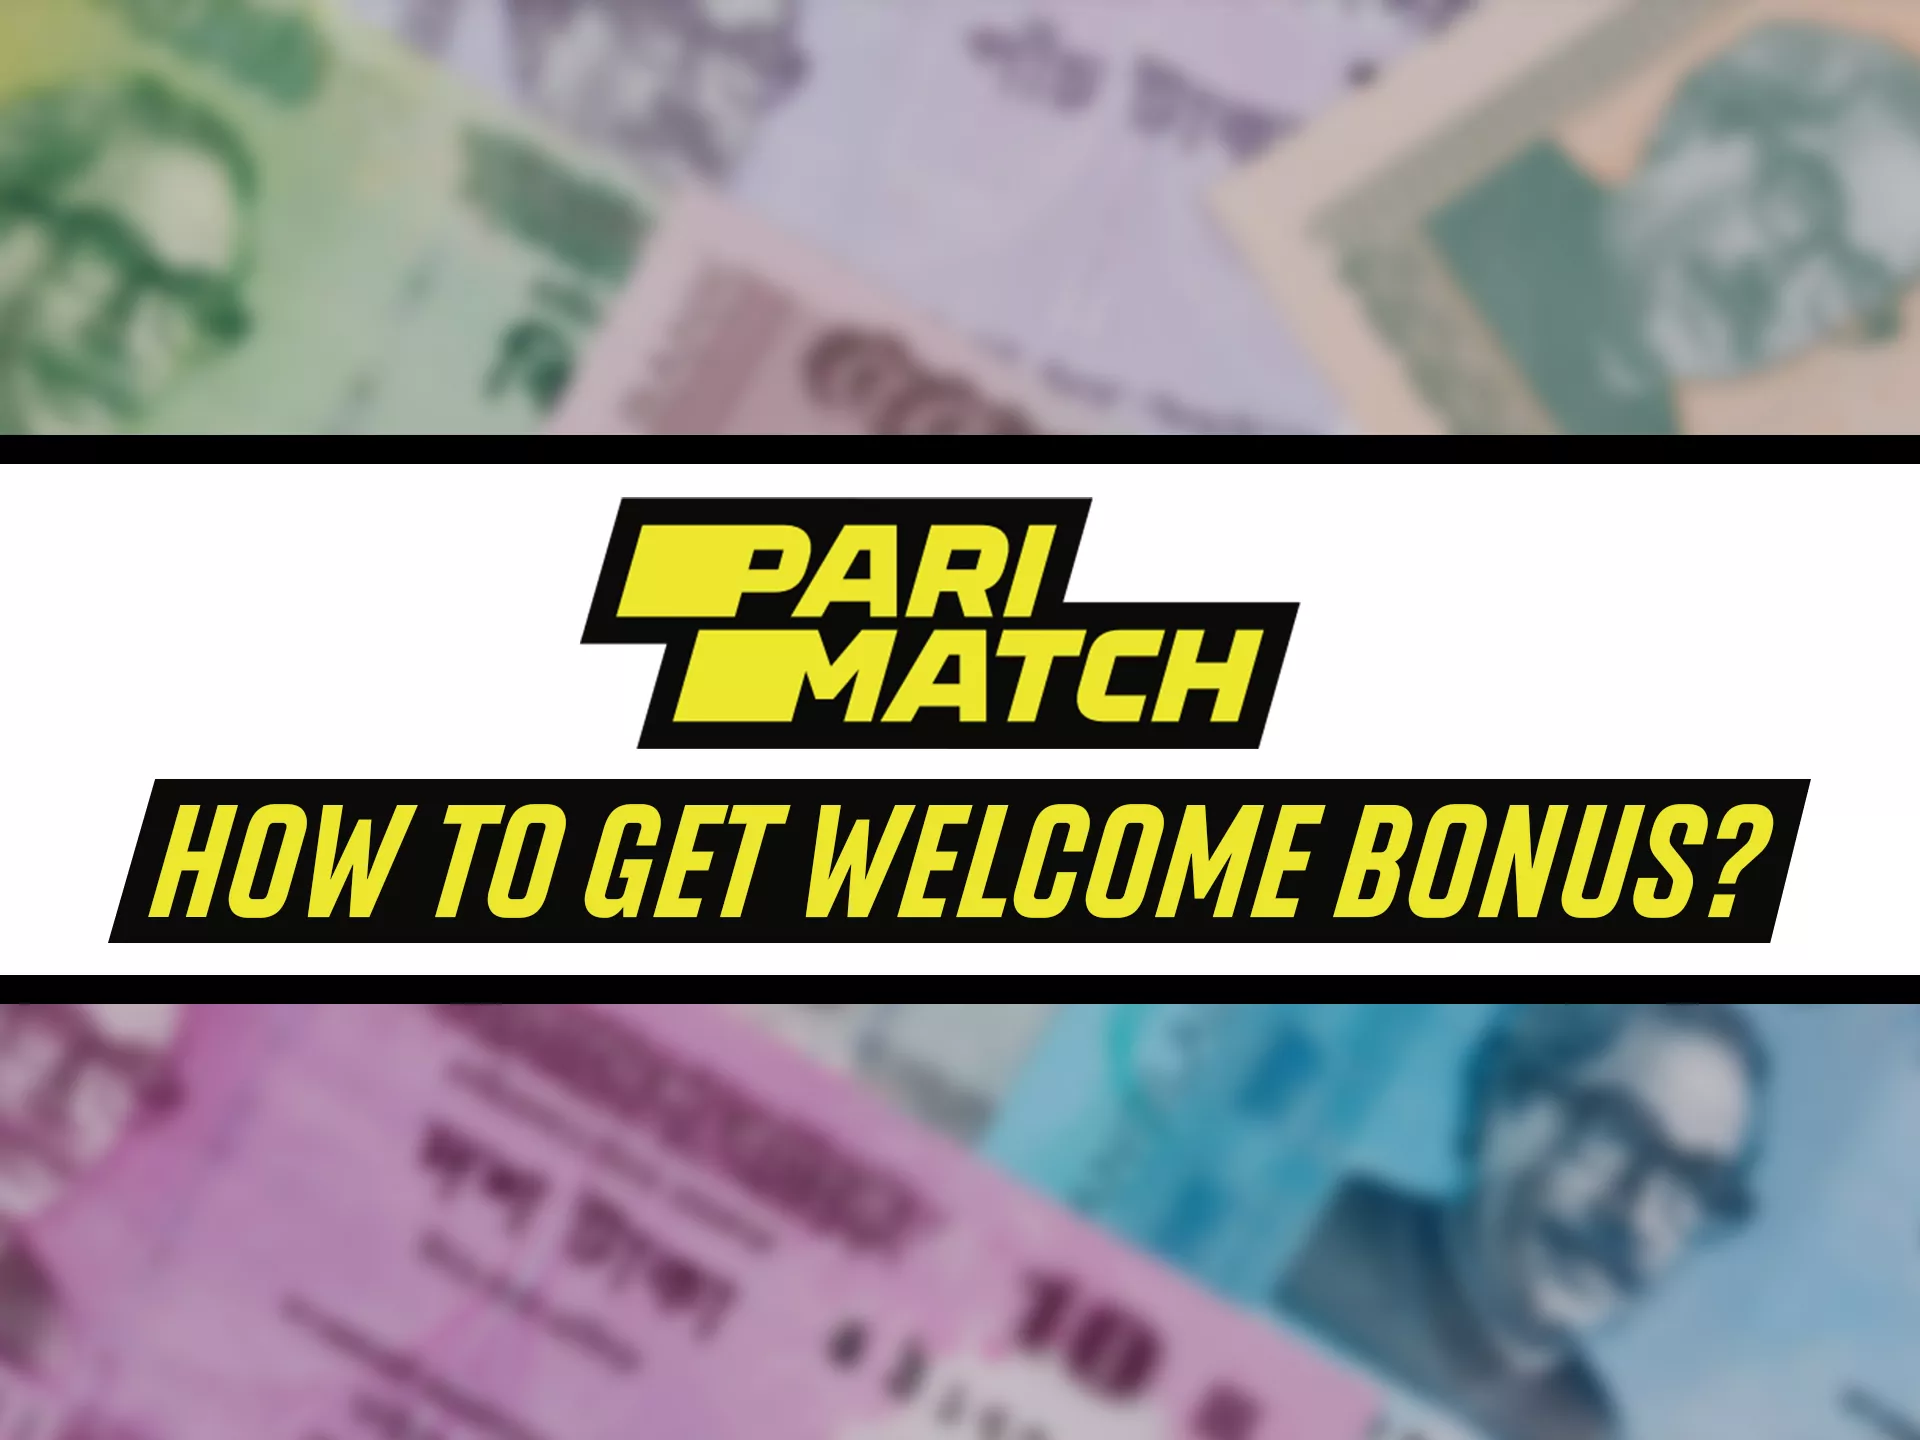 For start getting bonuses at Parimatch you need to registrate.